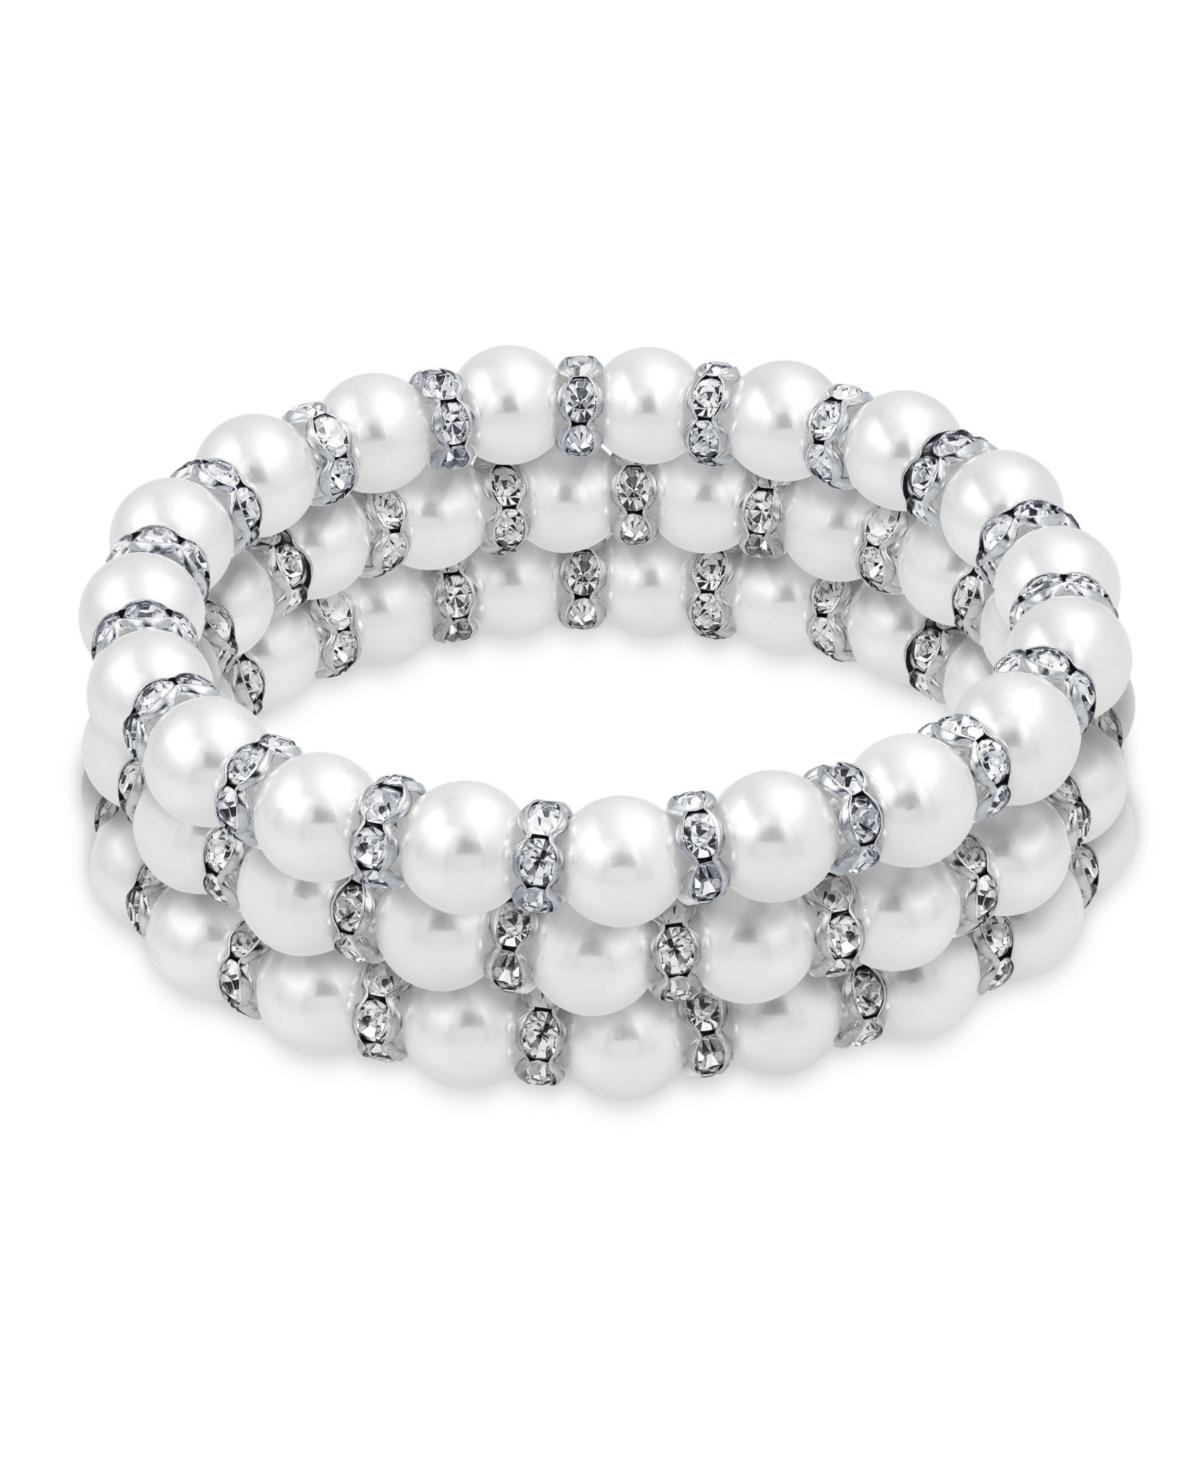 Set of 3 White Simulated Pearl Stackable Strand Stretch Bracelet For Women White Crystal Rondelle Spacer Silver Plated Brass - White set